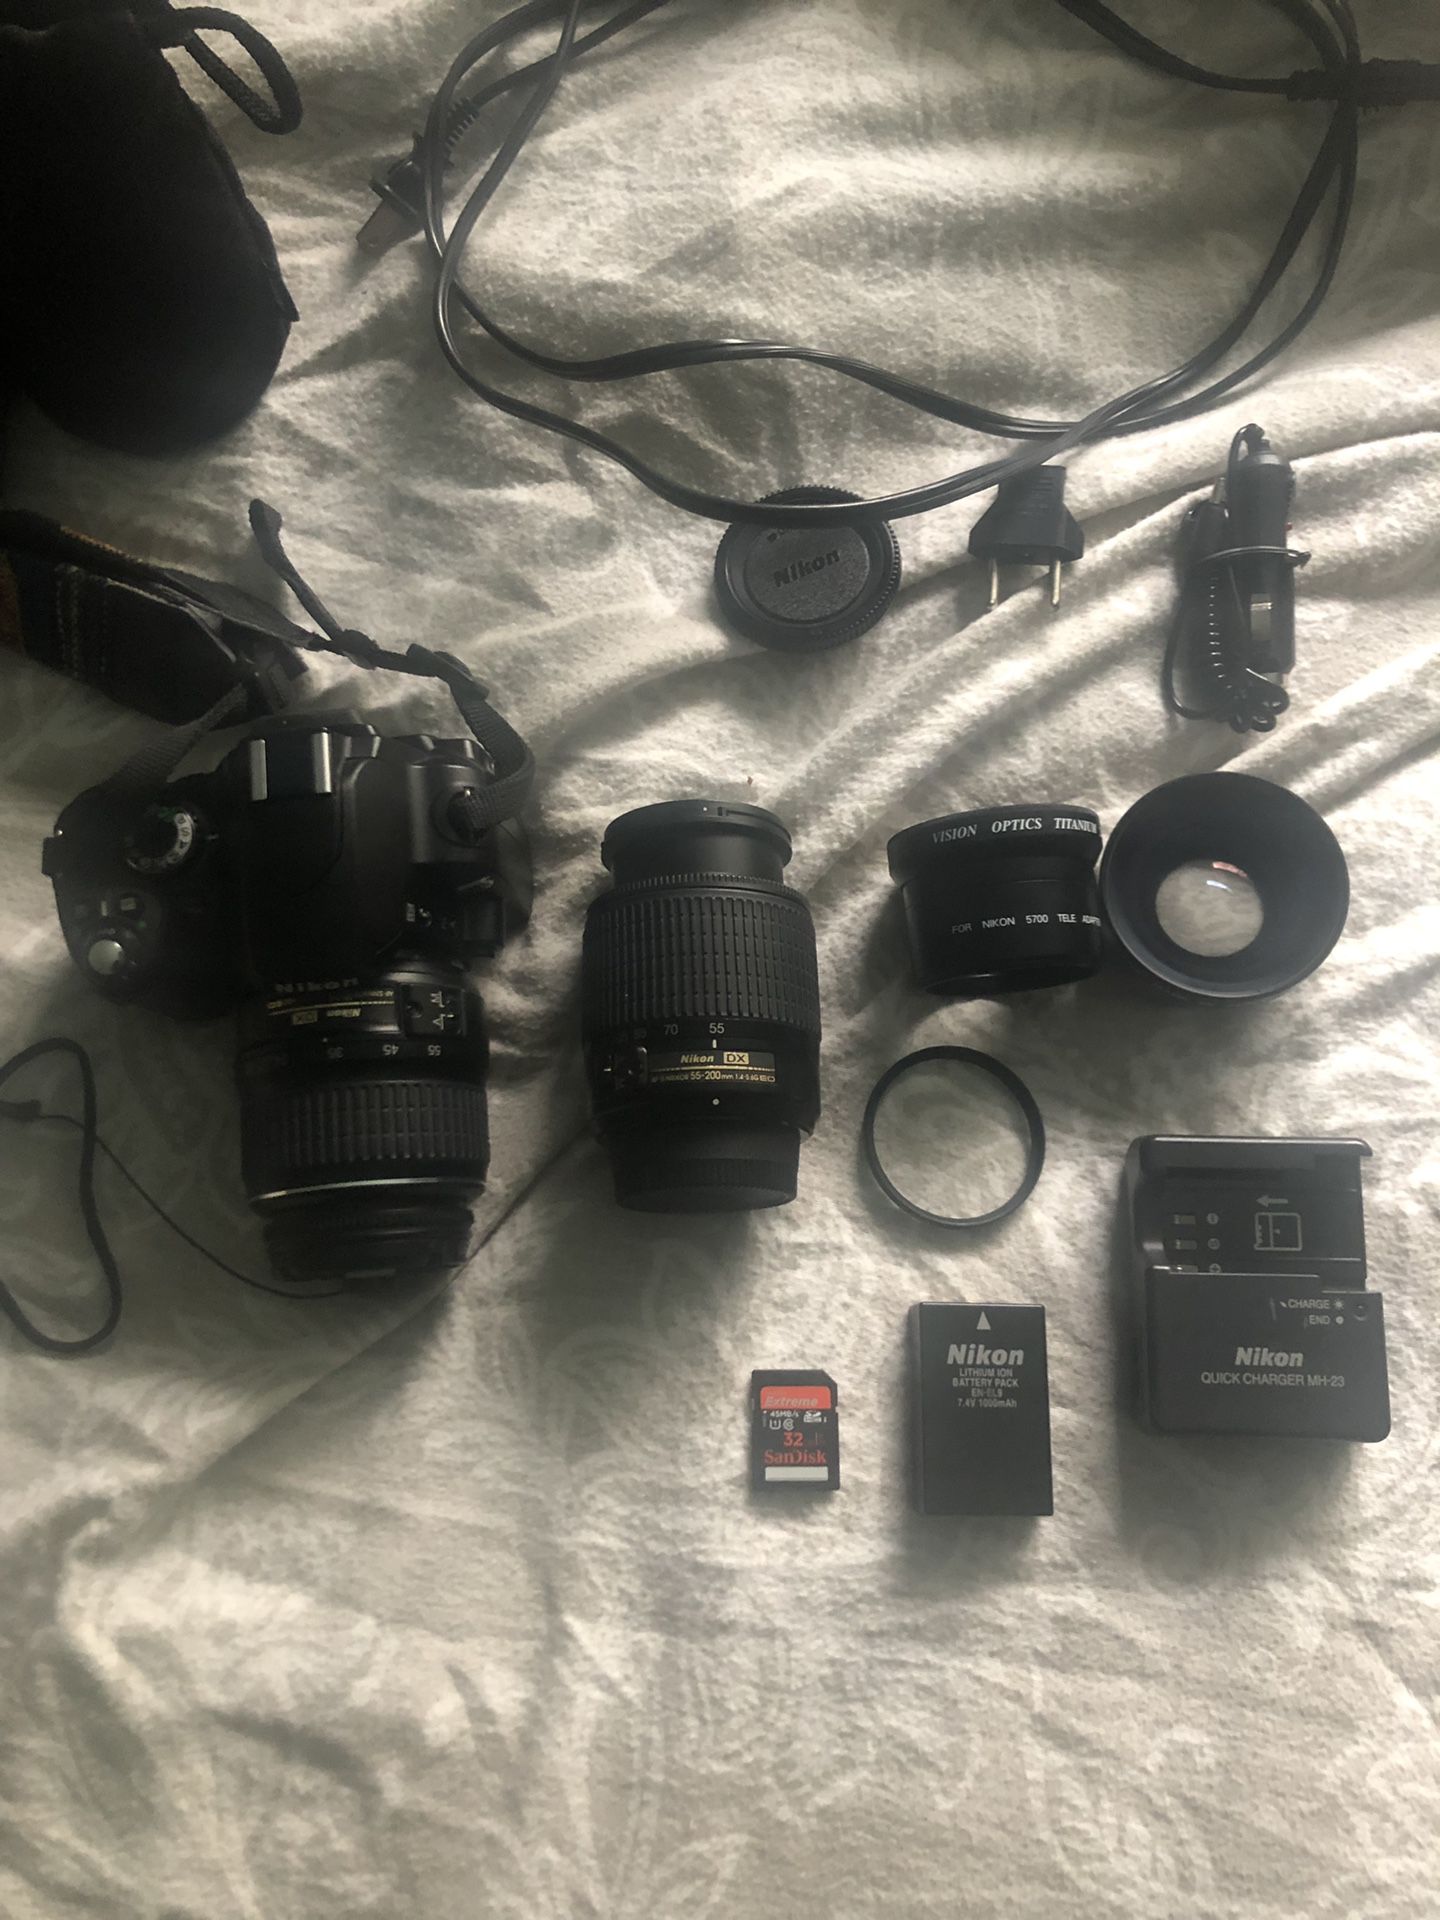 Nikon D40x with 4 lenses, 32GB card, charger, and case